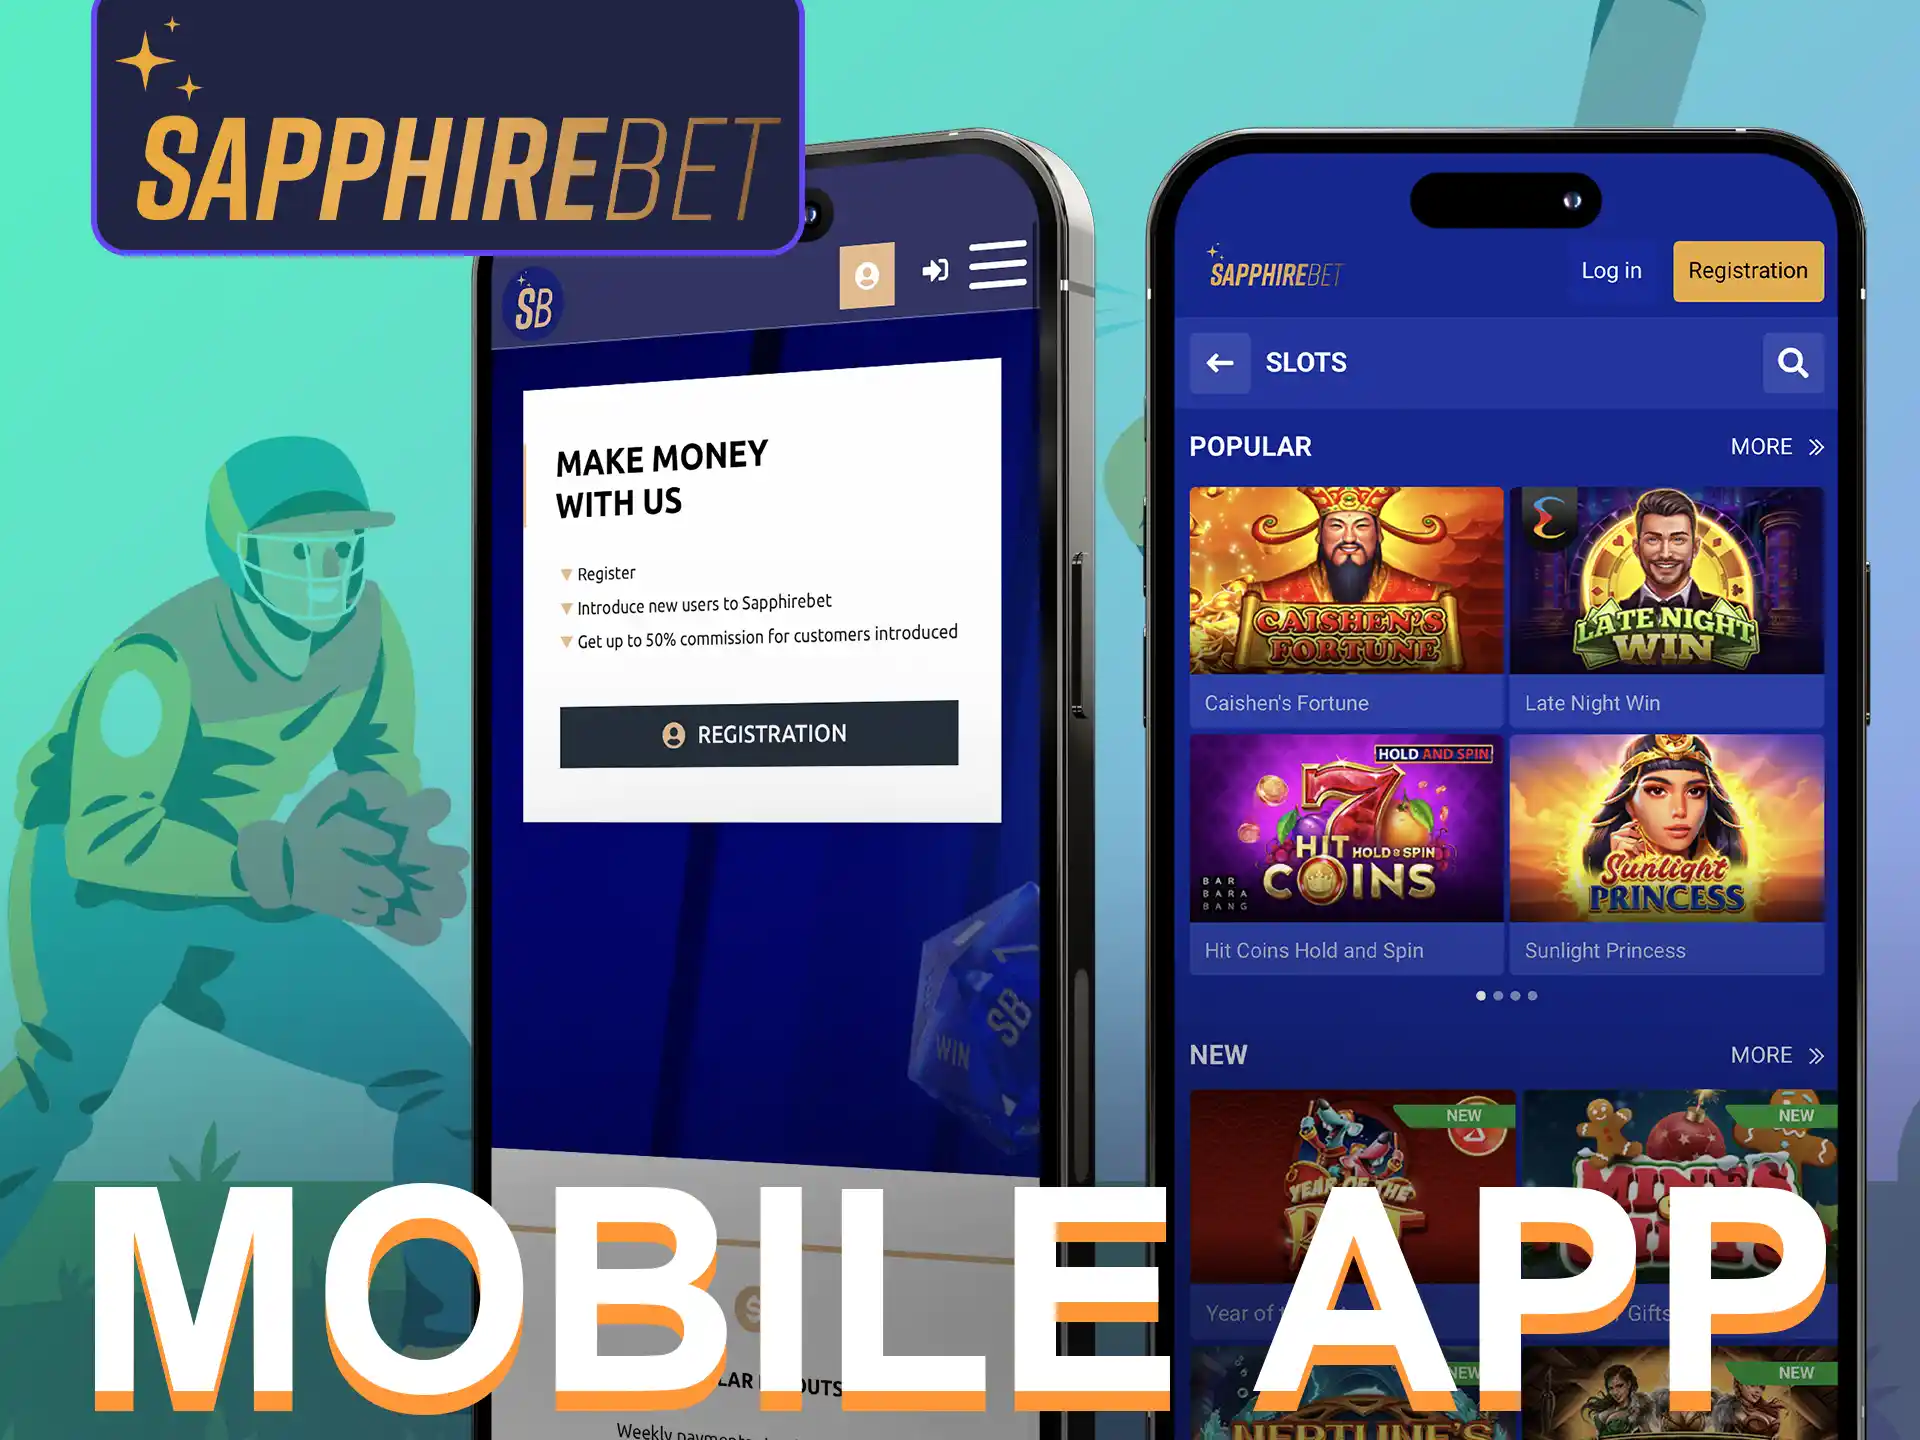 The SapphireBet app offers many special features for players.